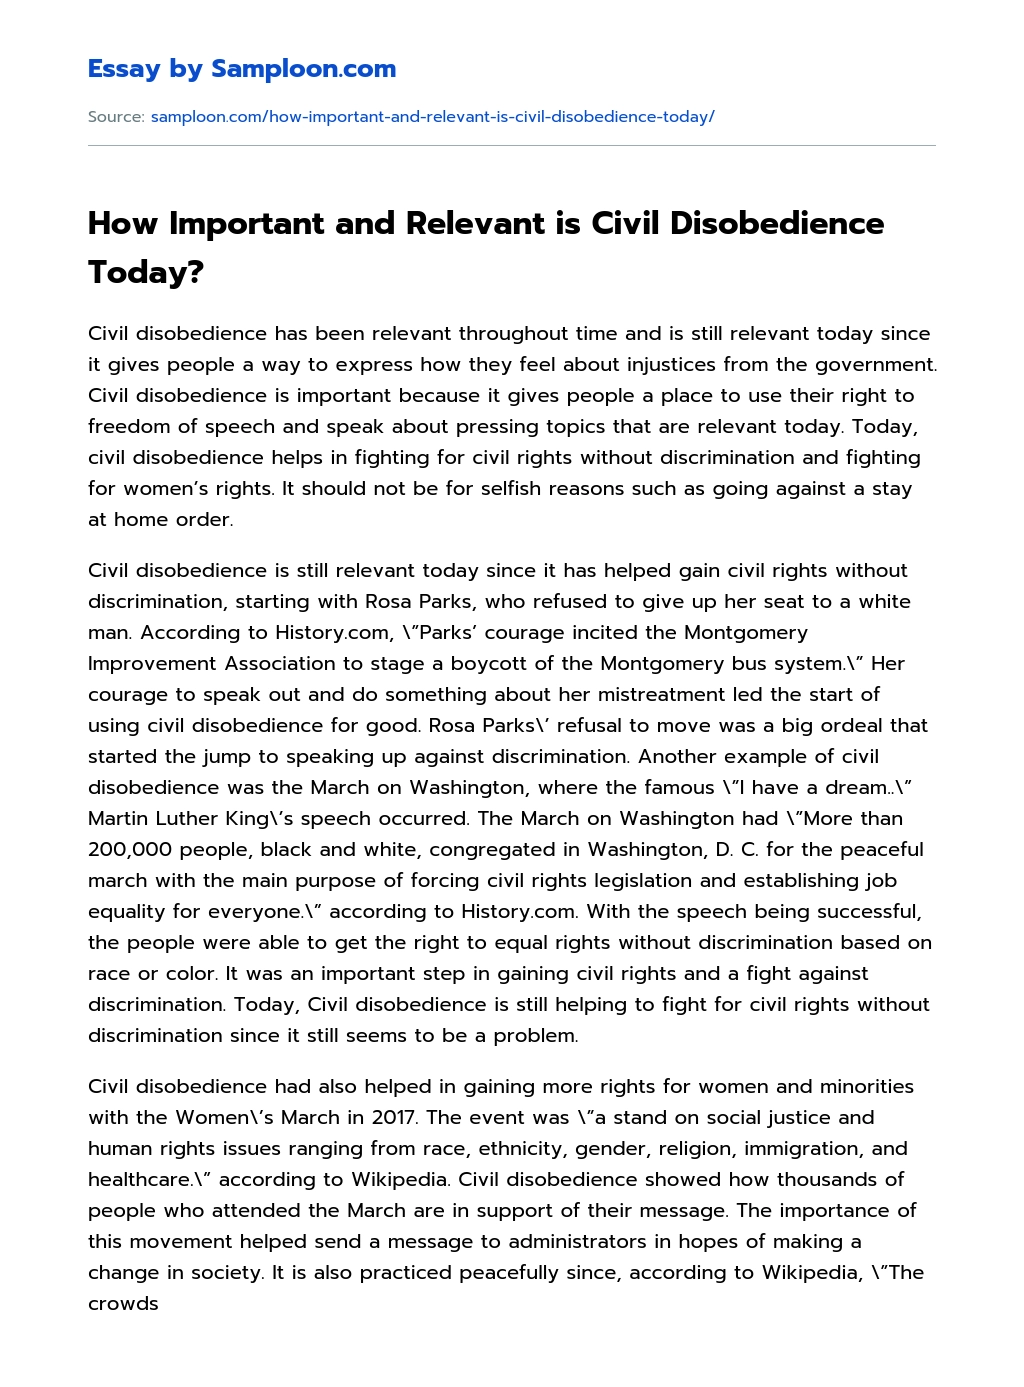 How Important and Relevant is Civil Disobedience Today? essay